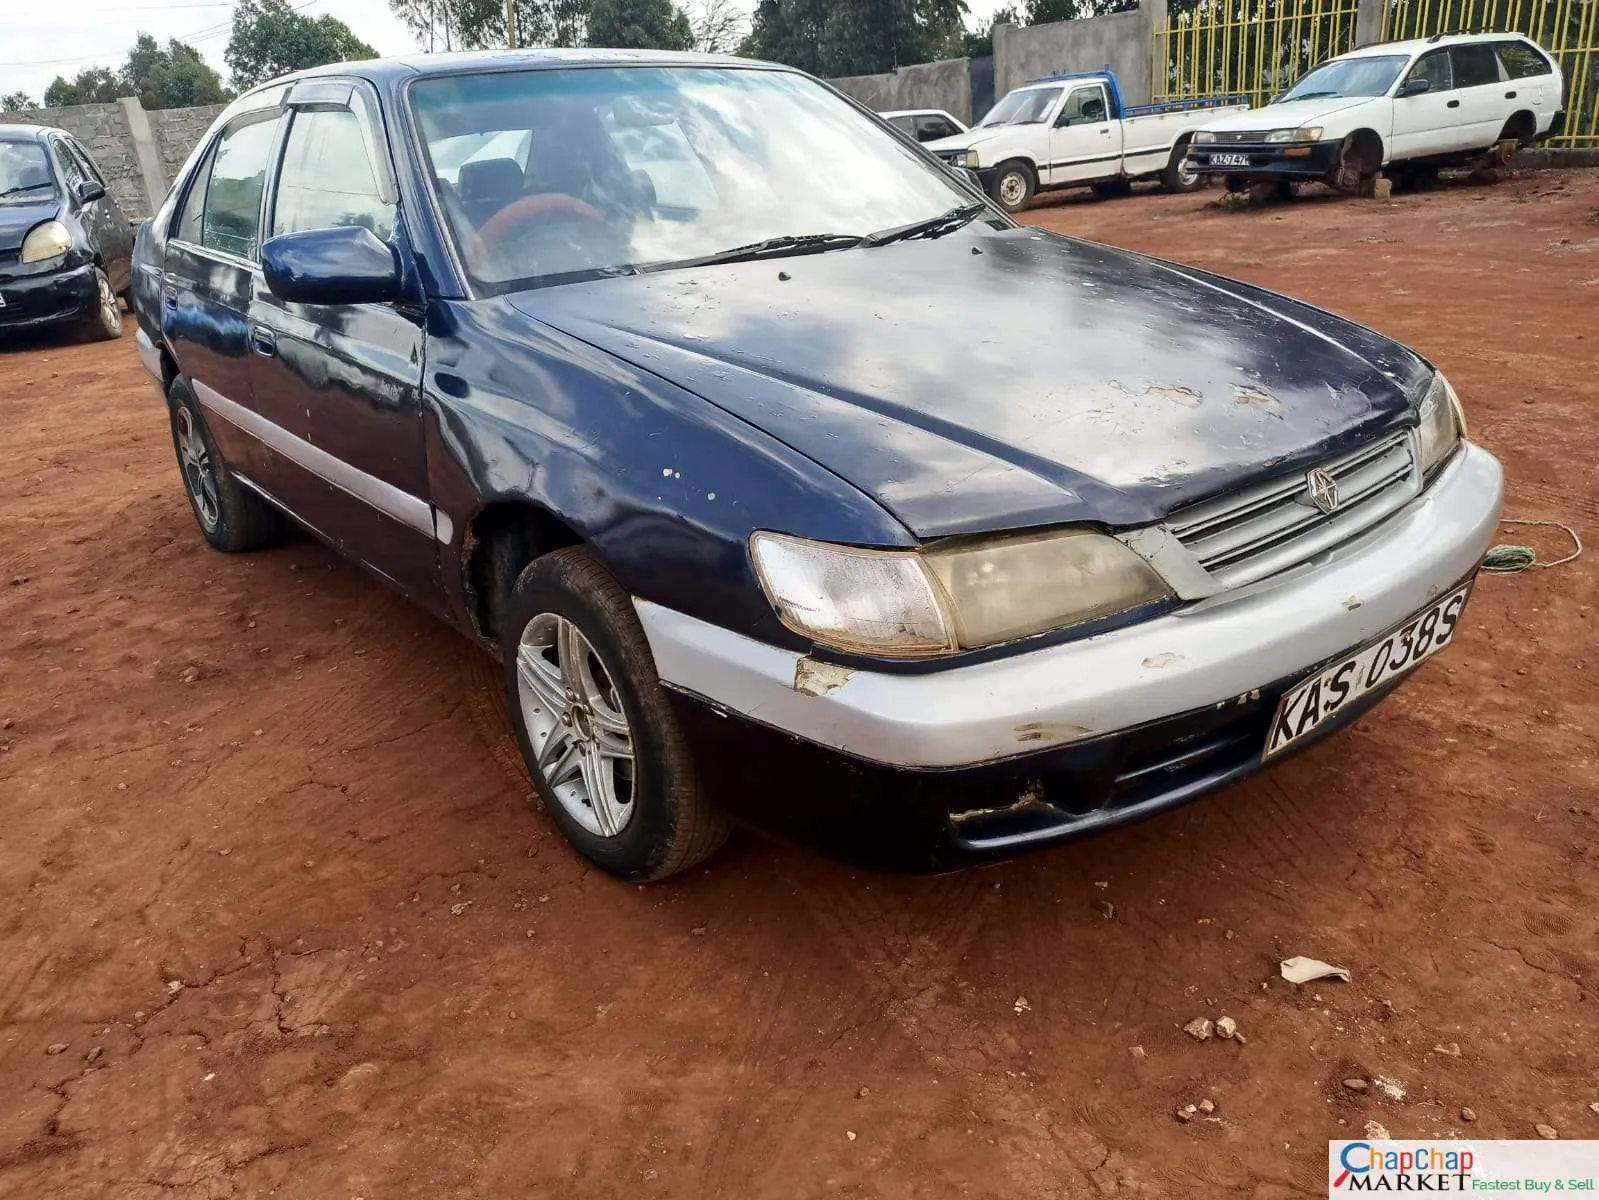 Cars Cars For Sale/Vehicles-Toyota Premio for sale in Kenya nyoka 220k ONLY You pay 20% Deposit Trade in Ok EXCLUSIVE 4